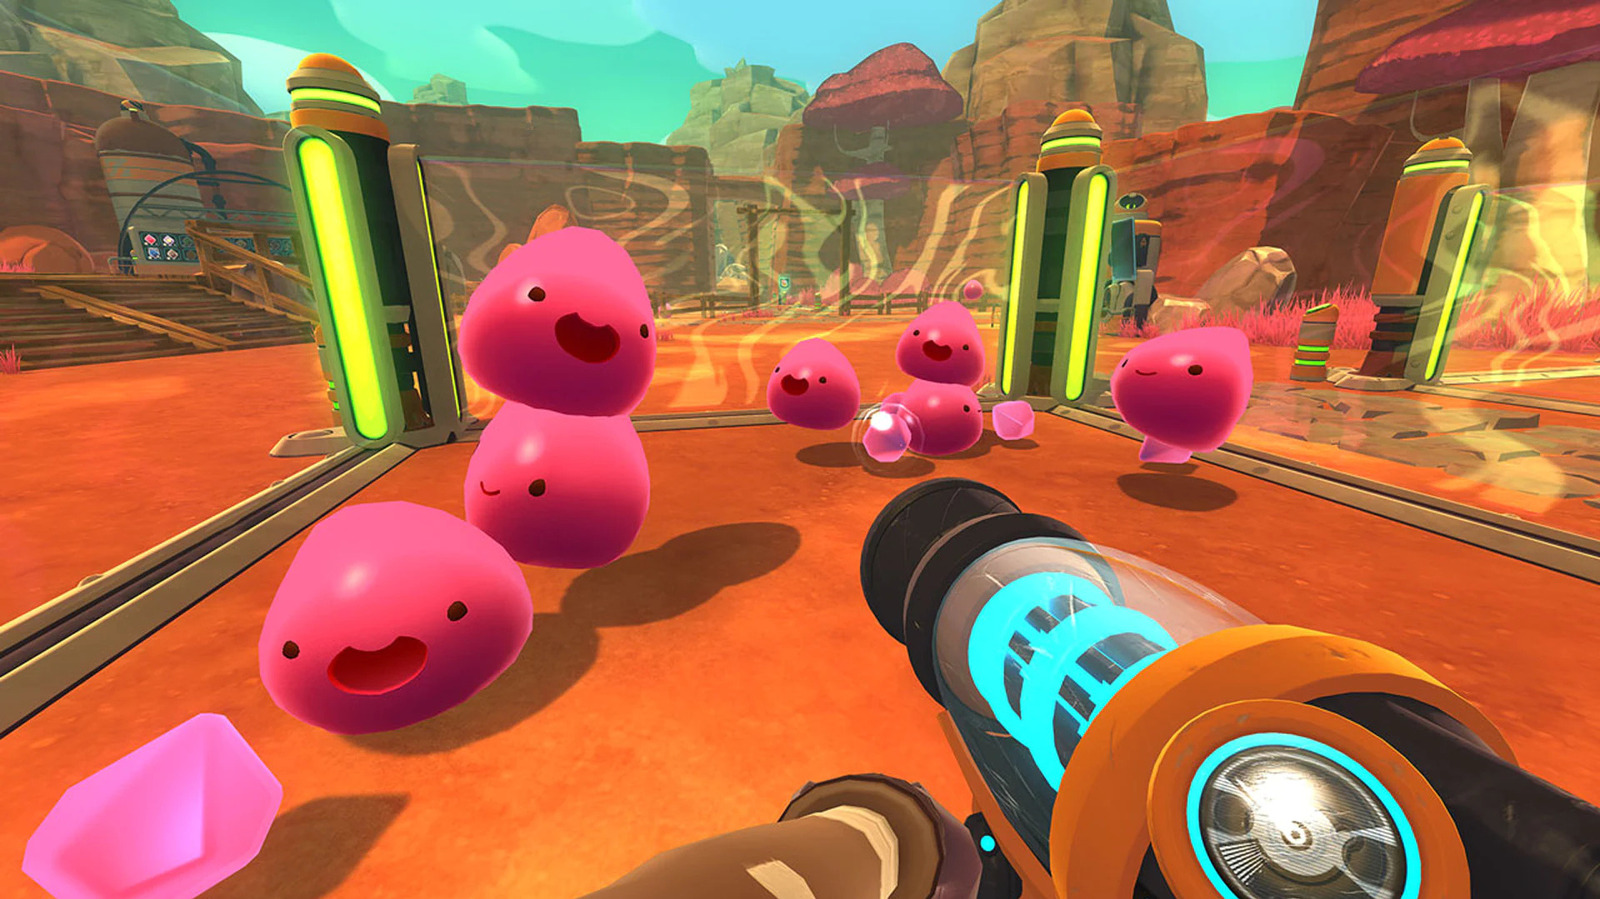 Slime Rancher Movie In The Works